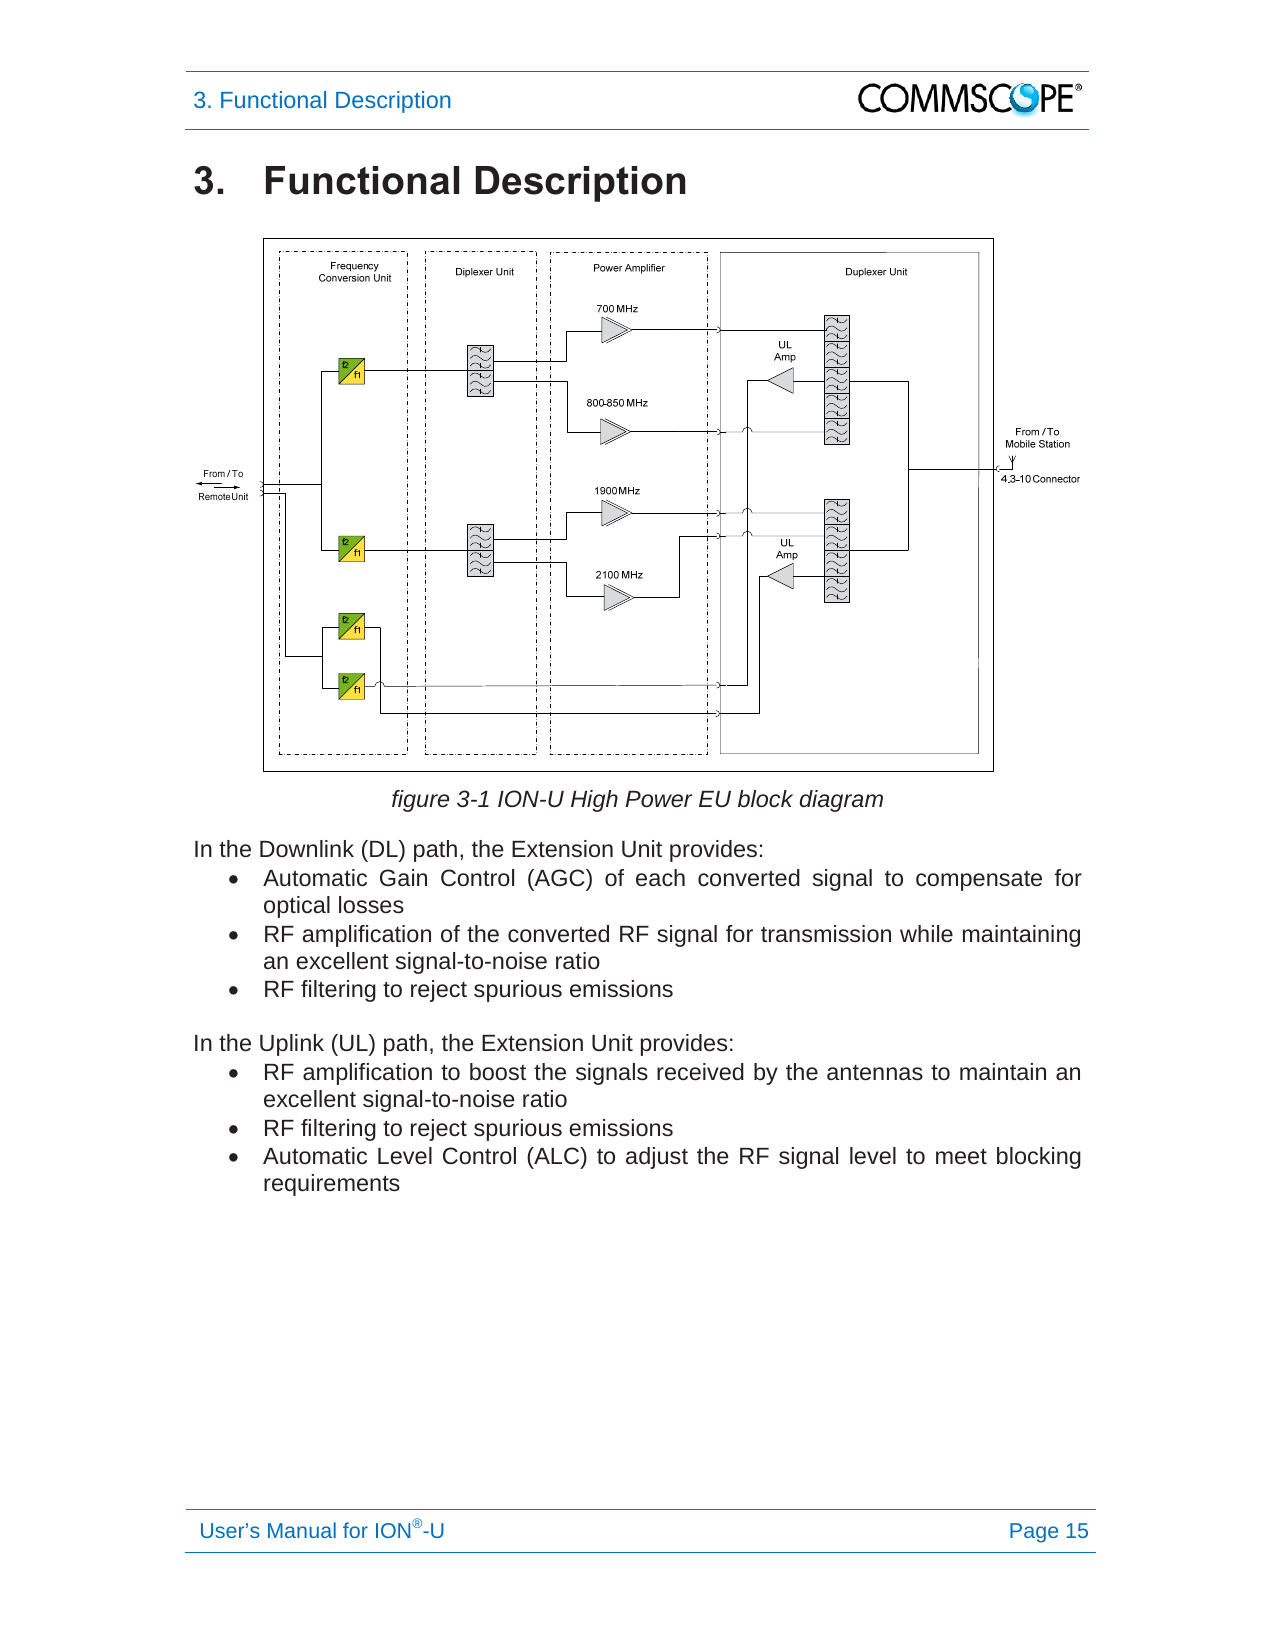 3. Functional Description   User’s Manual for ION®-U Page 15 3. Functional Description   figure 3-1 ION-U High Power EU block diagram In the Downlink (DL) path, the Extension Unit provides:   Automatic Gain Control (AGC) of each converted signal to compensate for optical losses   RF amplification of the converted RF signal for transmission while maintaining an excellent signal-to-noise ratio   RF filtering to reject spurious emissions  In the Uplink (UL) path, the Extension Unit provides:   RF amplification to boost the signals received by the antennas to maintain an excellent signal-to-noise ratio   RF filtering to reject spurious emissions   Automatic Level Control (ALC) to adjust the RF signal level to meet blocking requirements    